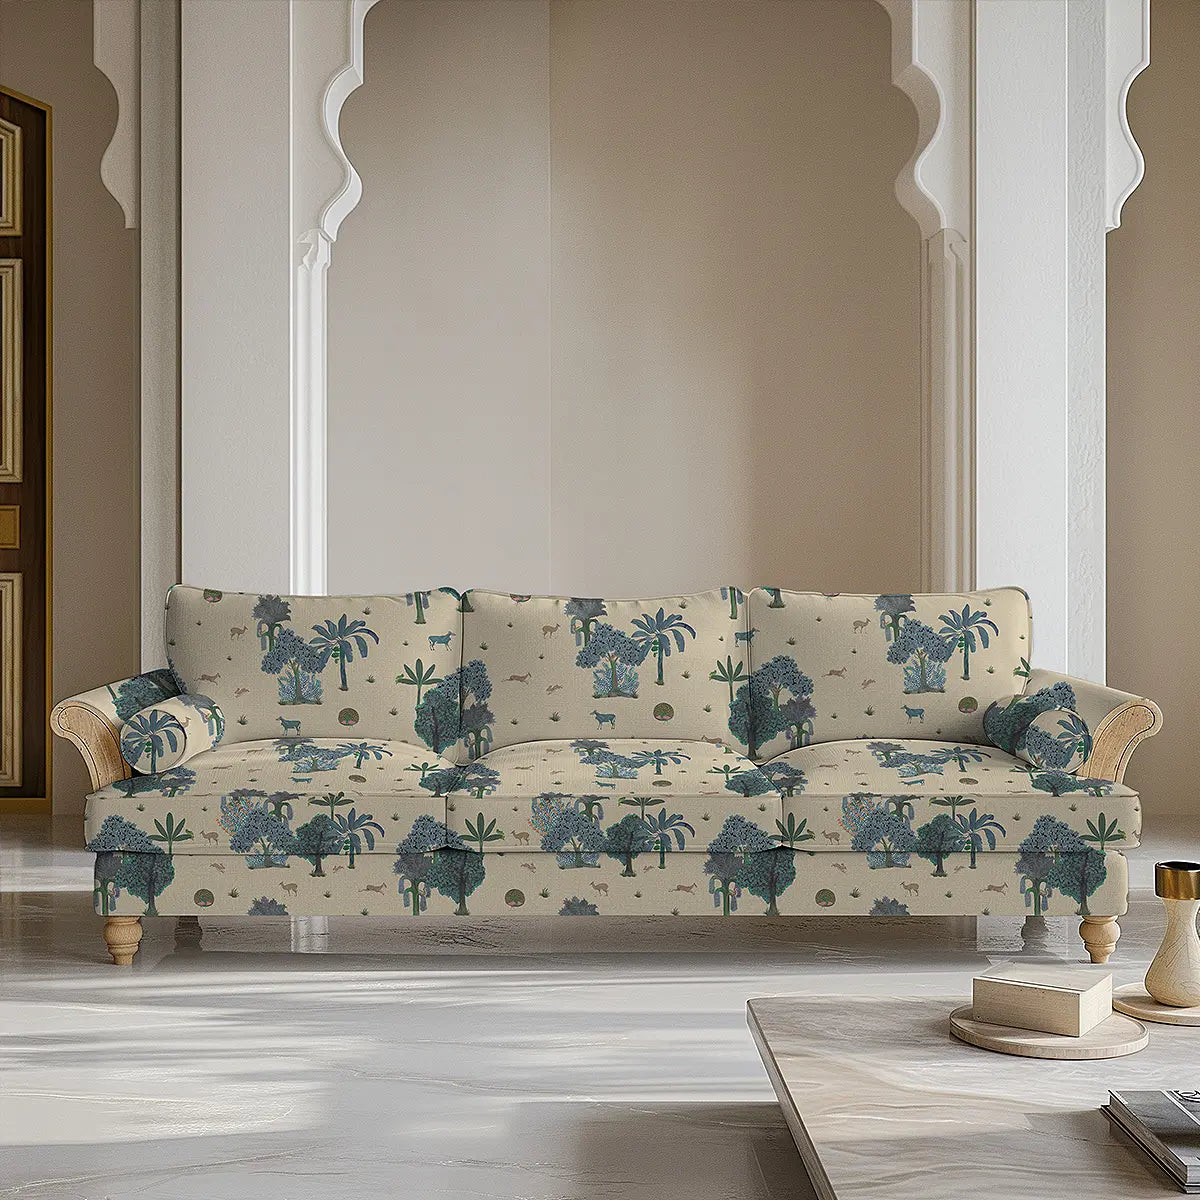 Taal Sofa and Chairs Upholstery Fabric Cream & Blue Indian Tropical jungle design